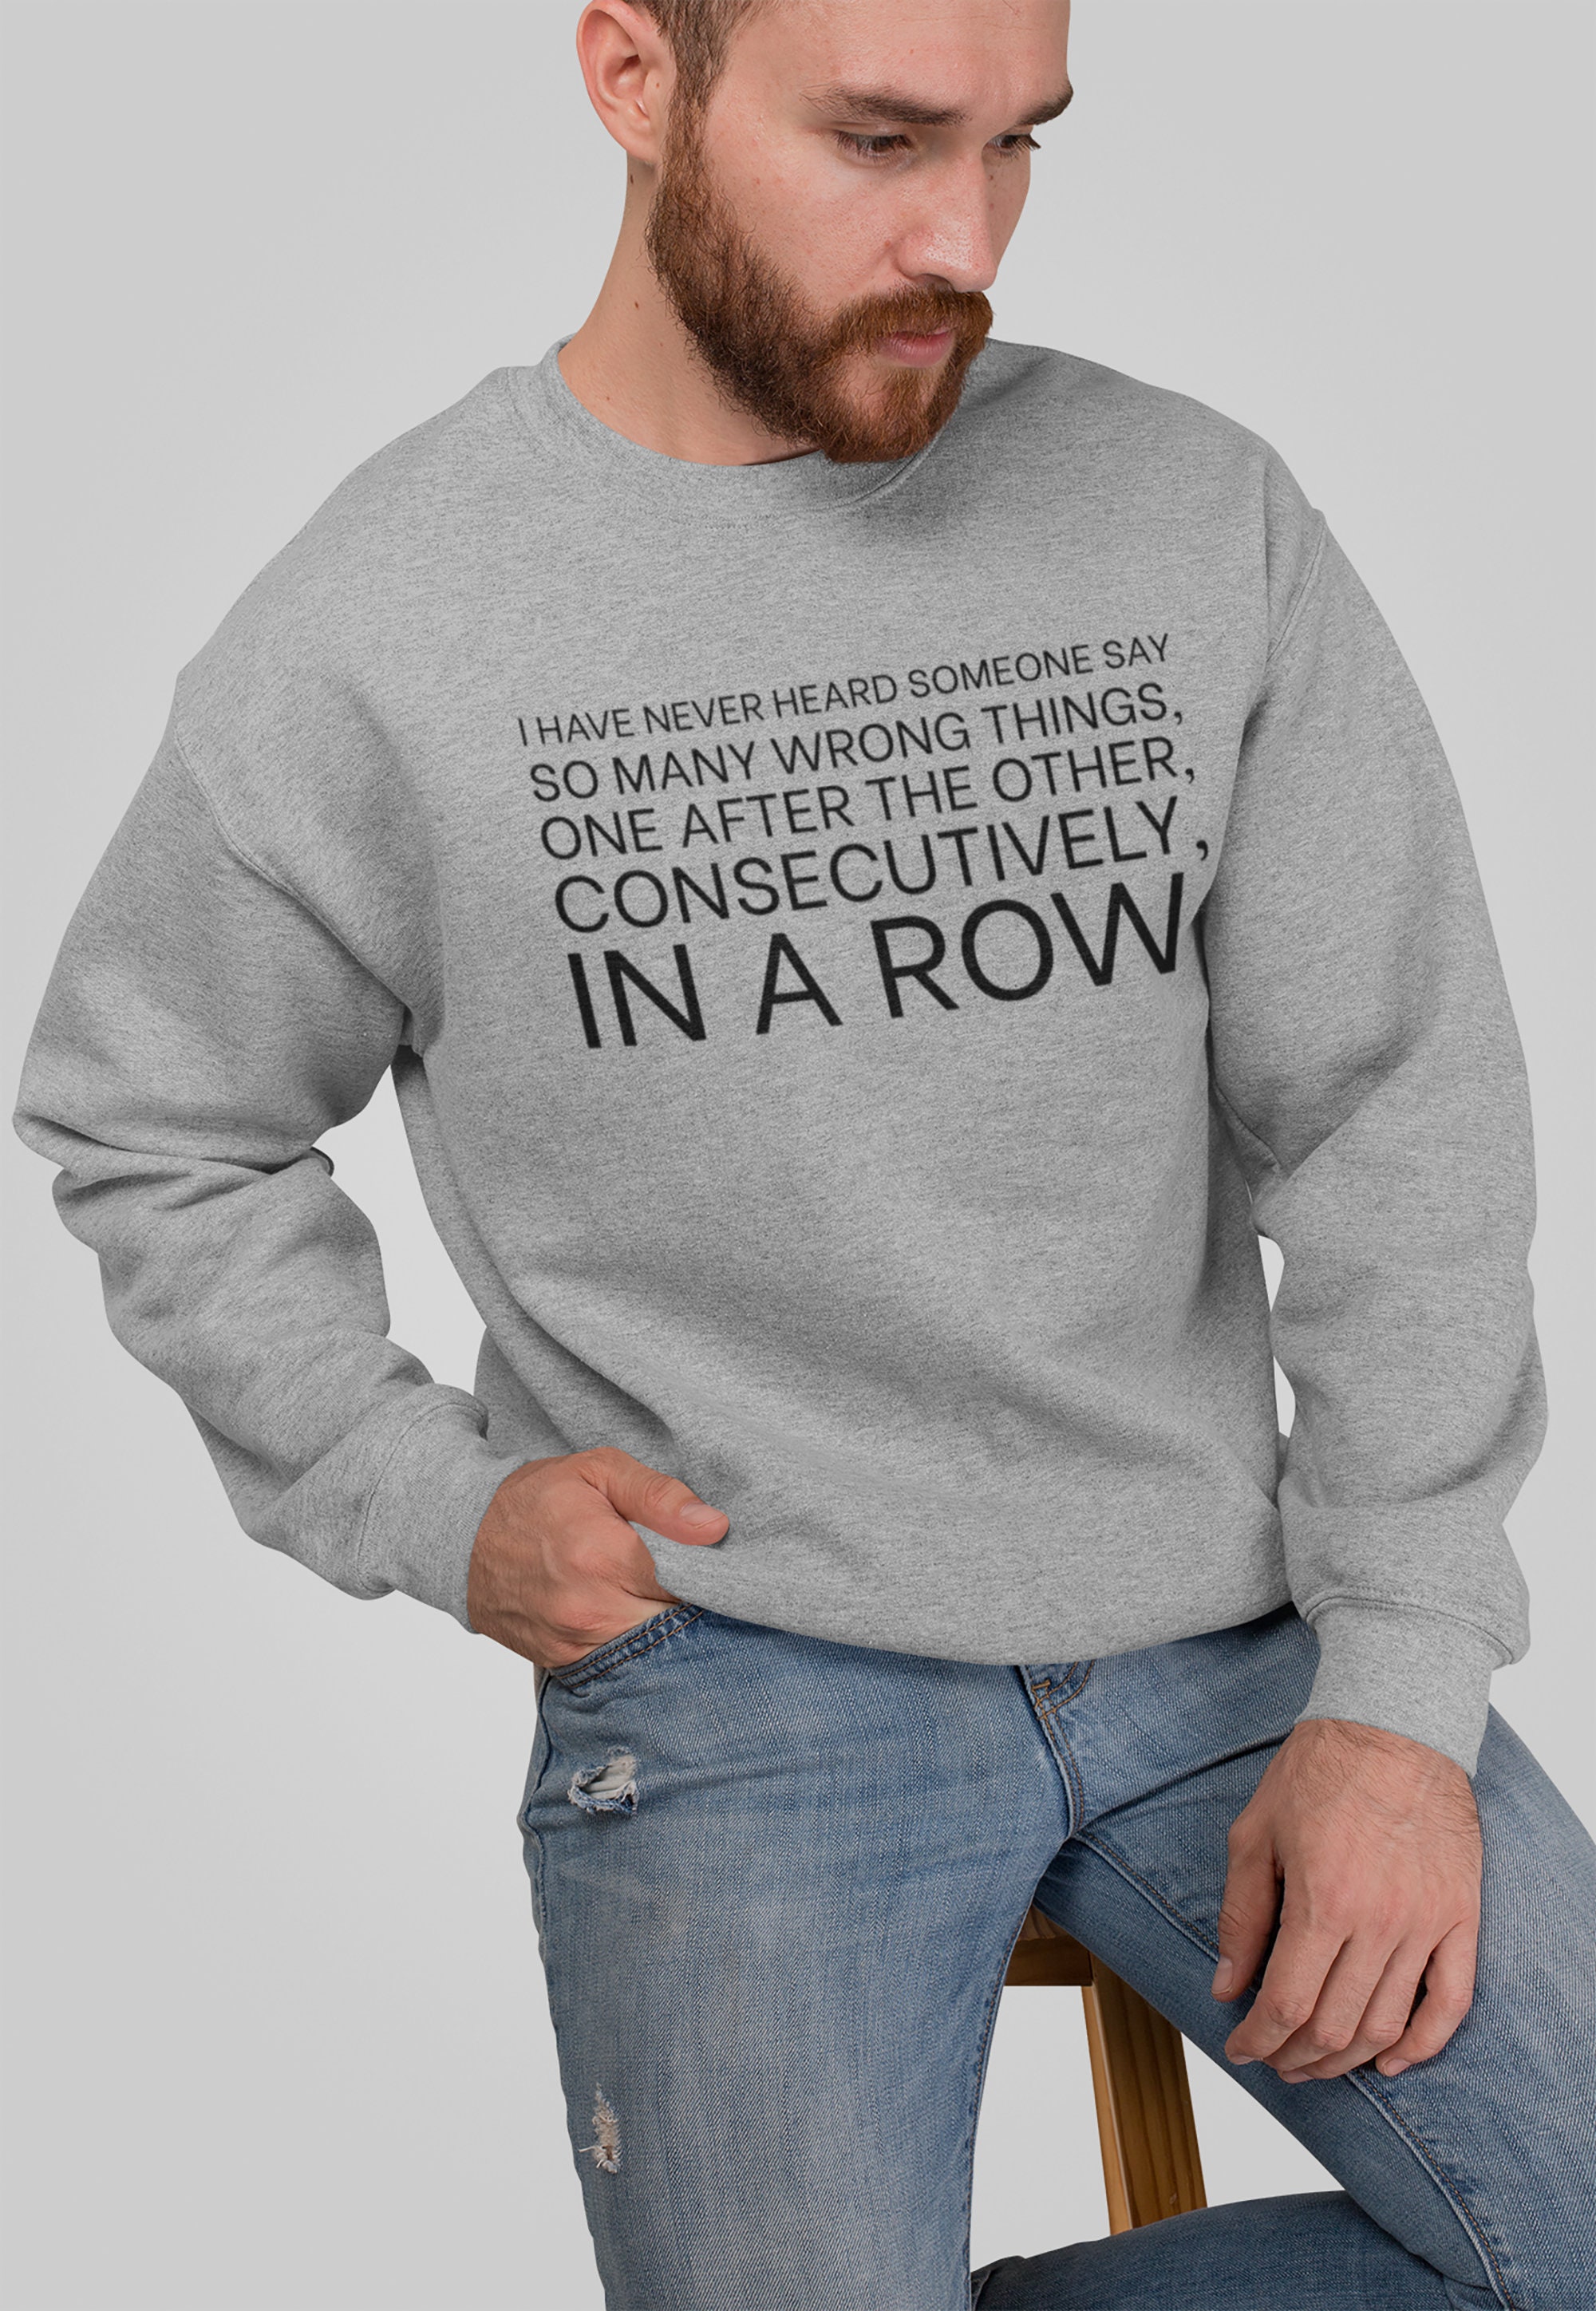 David Rose Quote Sweater I've Never Heard Someone Say so - Etsy